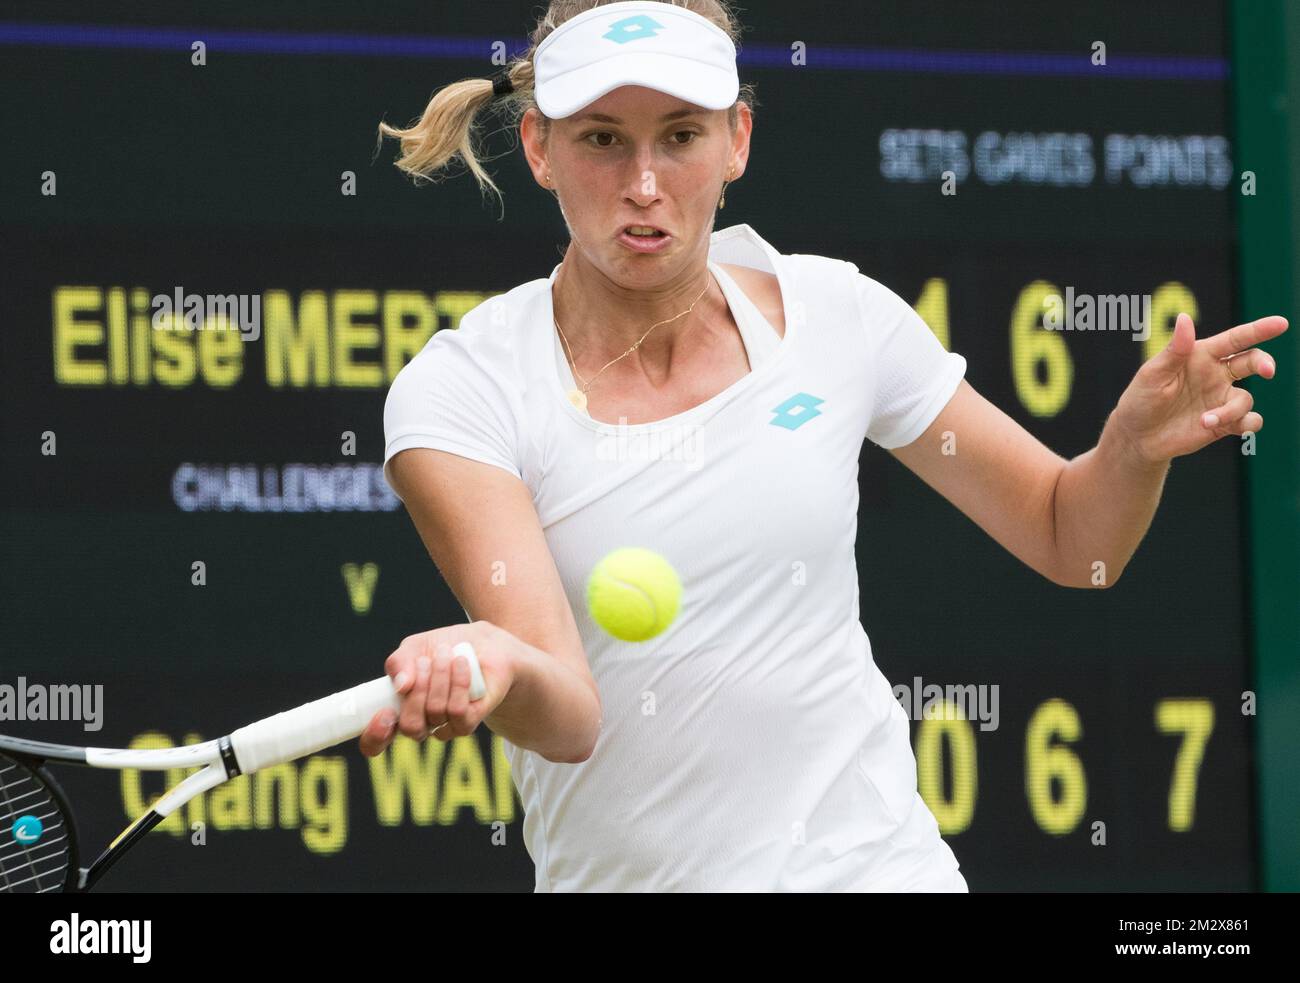 Belgian Elise Mertens (WTA 21) pictured in action during a tennis match against Chinese Wang Qiang (WTA 15) in the third round of the women's singles at the 2019 Wimbledon grand slam tennis tournament at the All England Tennis Club, in south-west London, Britain, Saturday 06 July 2019. BELGA PHOTO BENOIT DOPPAGNE  Stock Photo